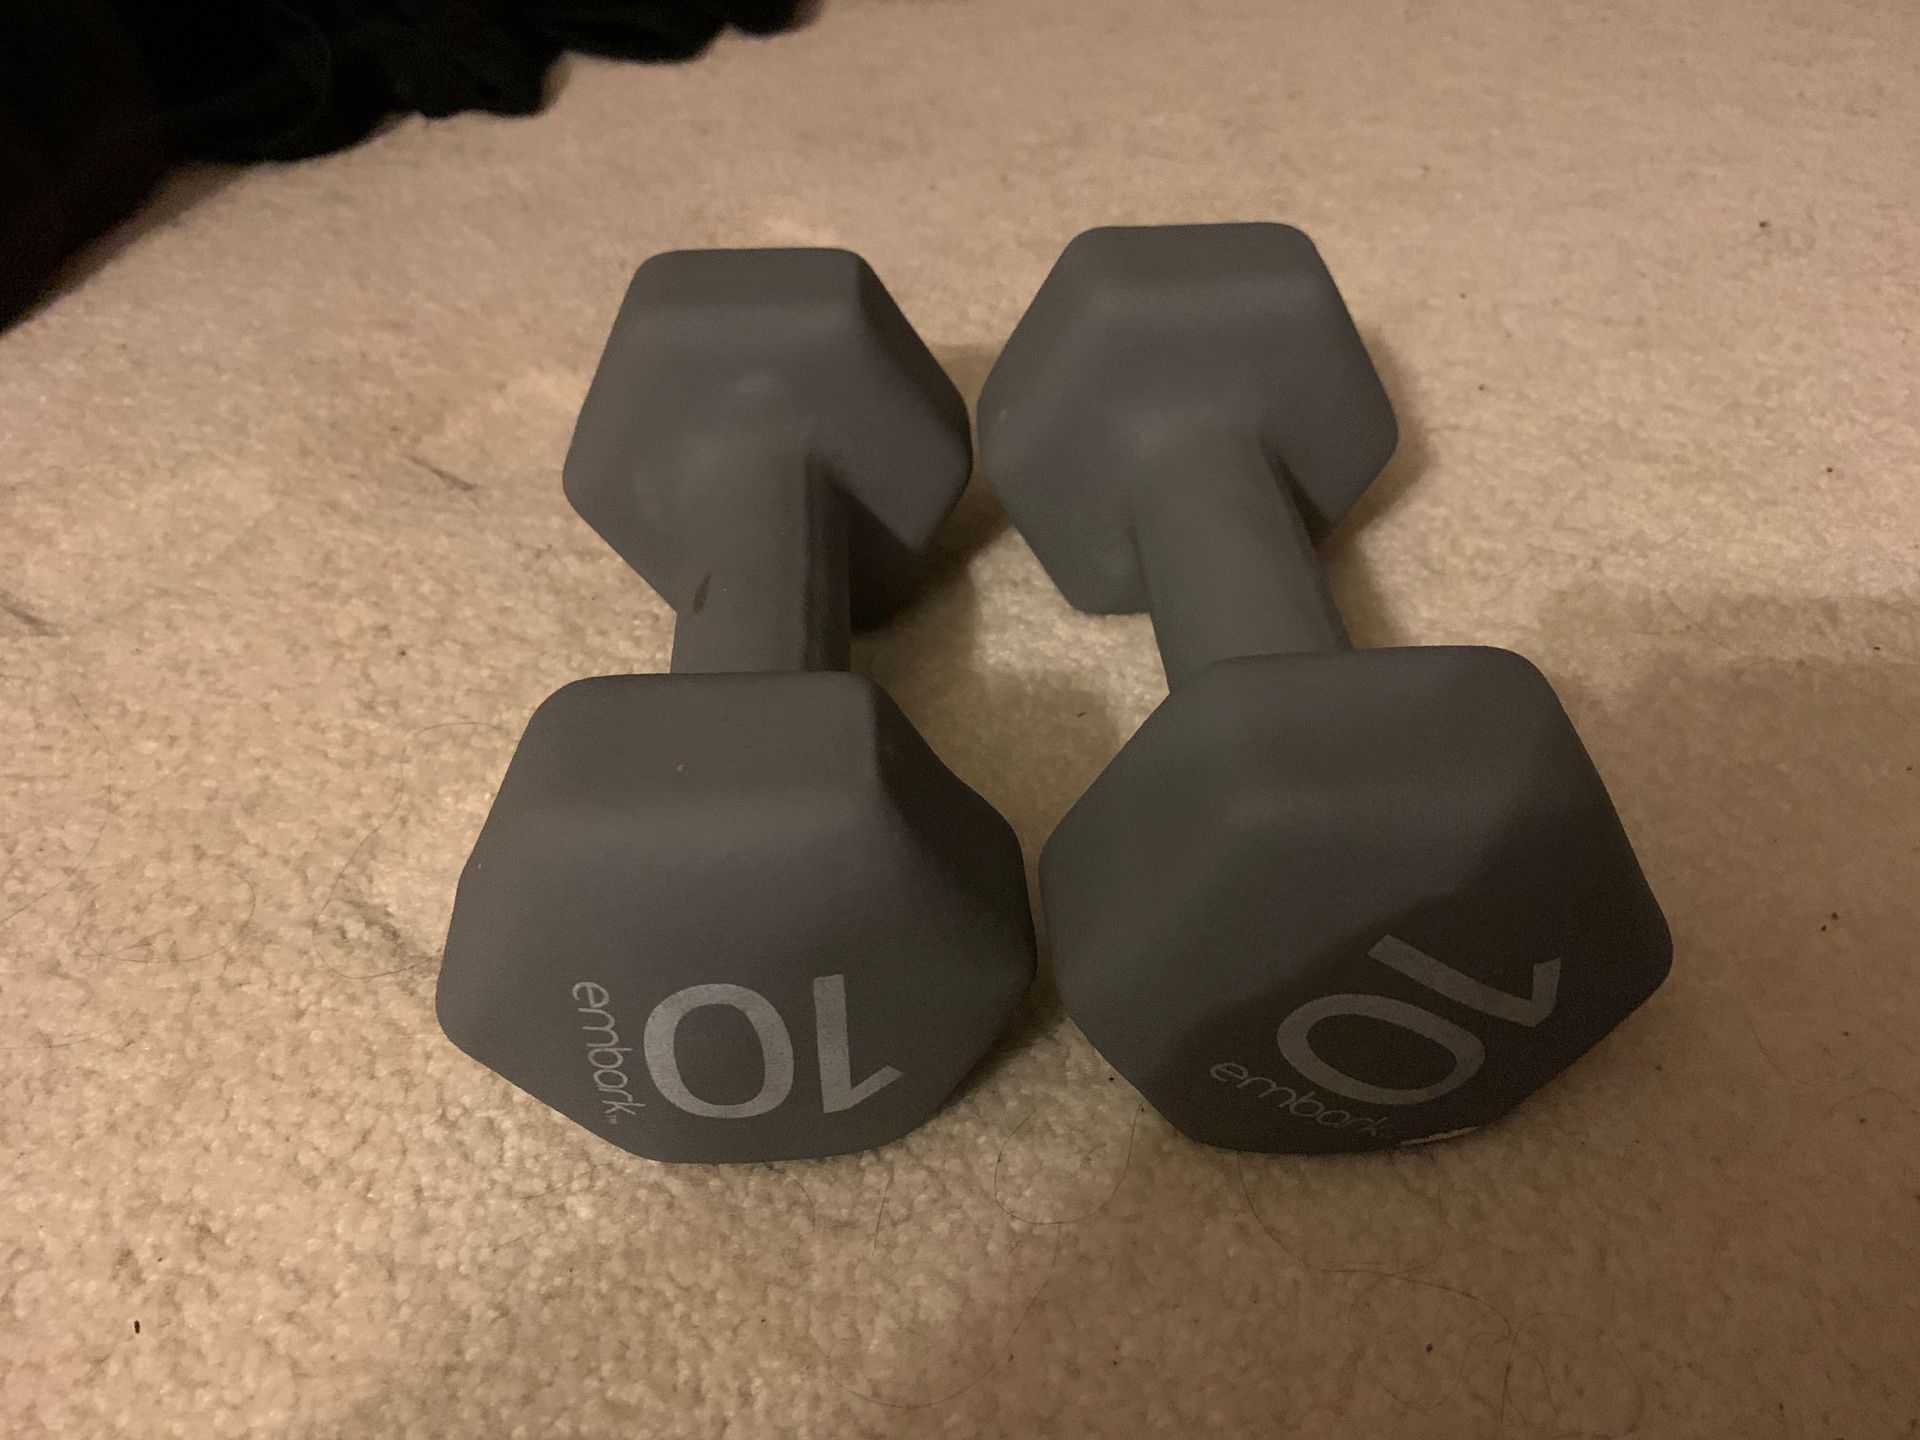 1 Pair of 10 Pound Dumbbells